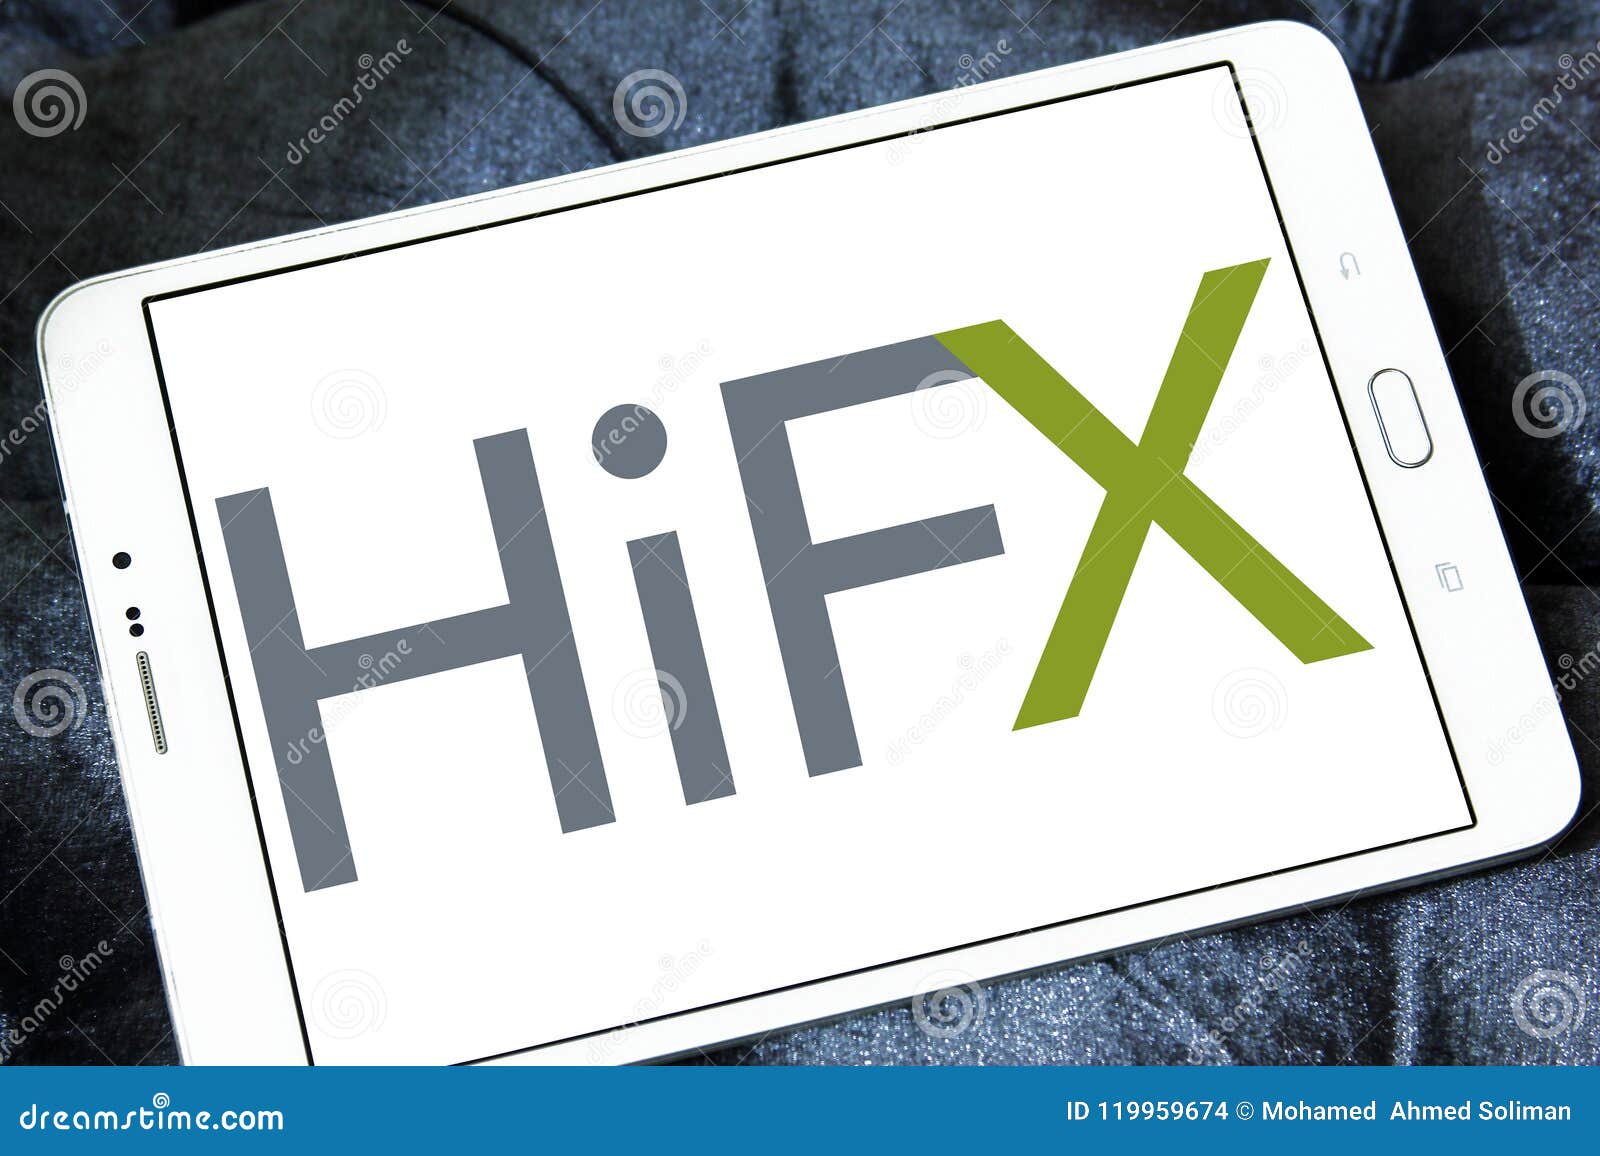 hifx foreign exchange broker logo editorial stock image - image of editorial, hifx: 119959674